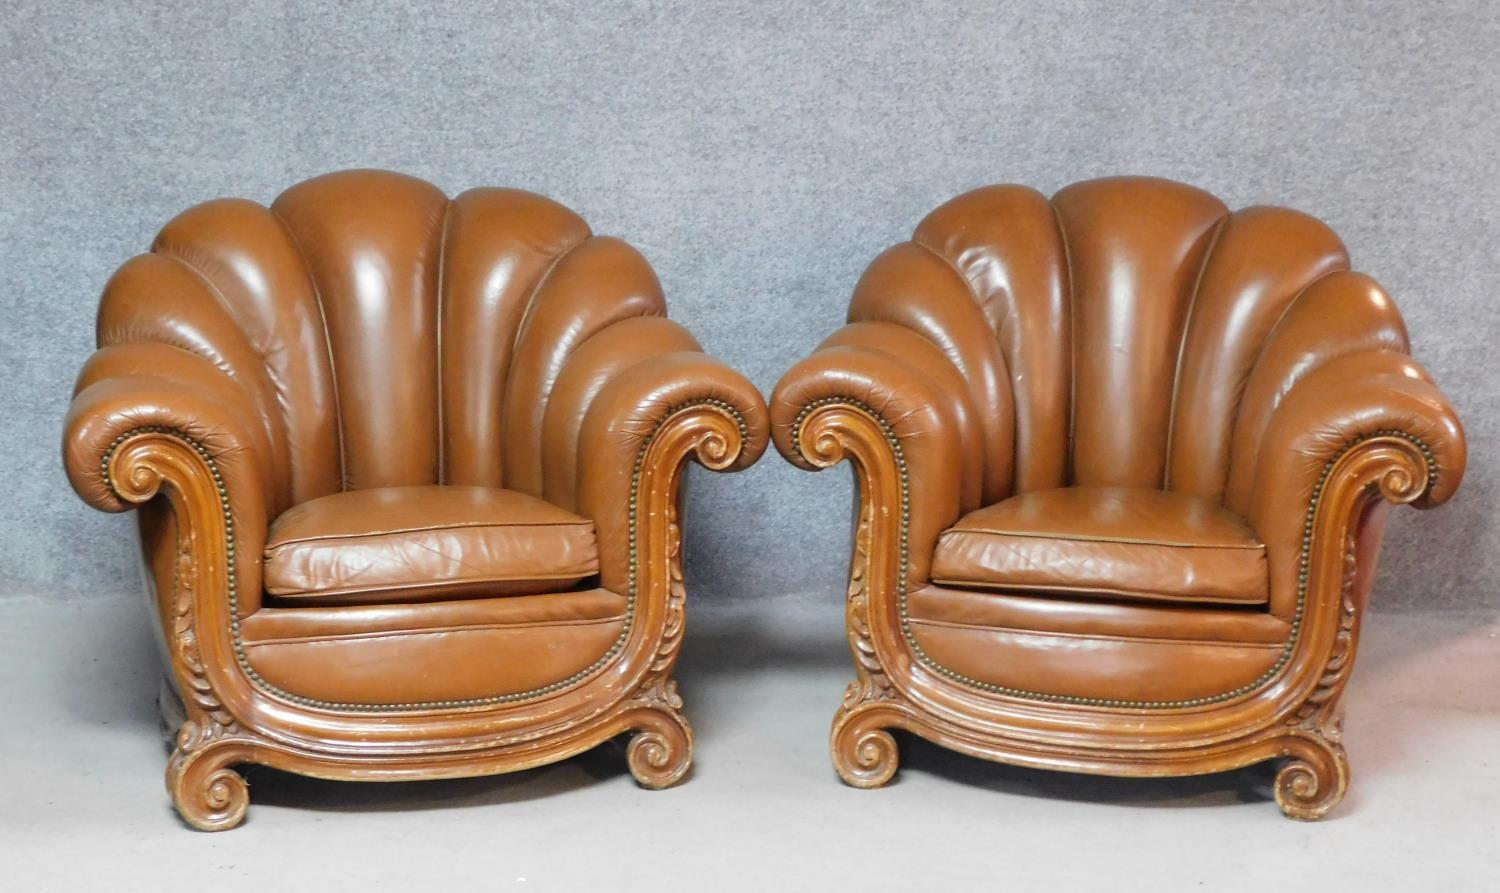 A pair of Italian walnut framed Arredo style armchairs in tan leather scalloped upholstery. H.80 W.